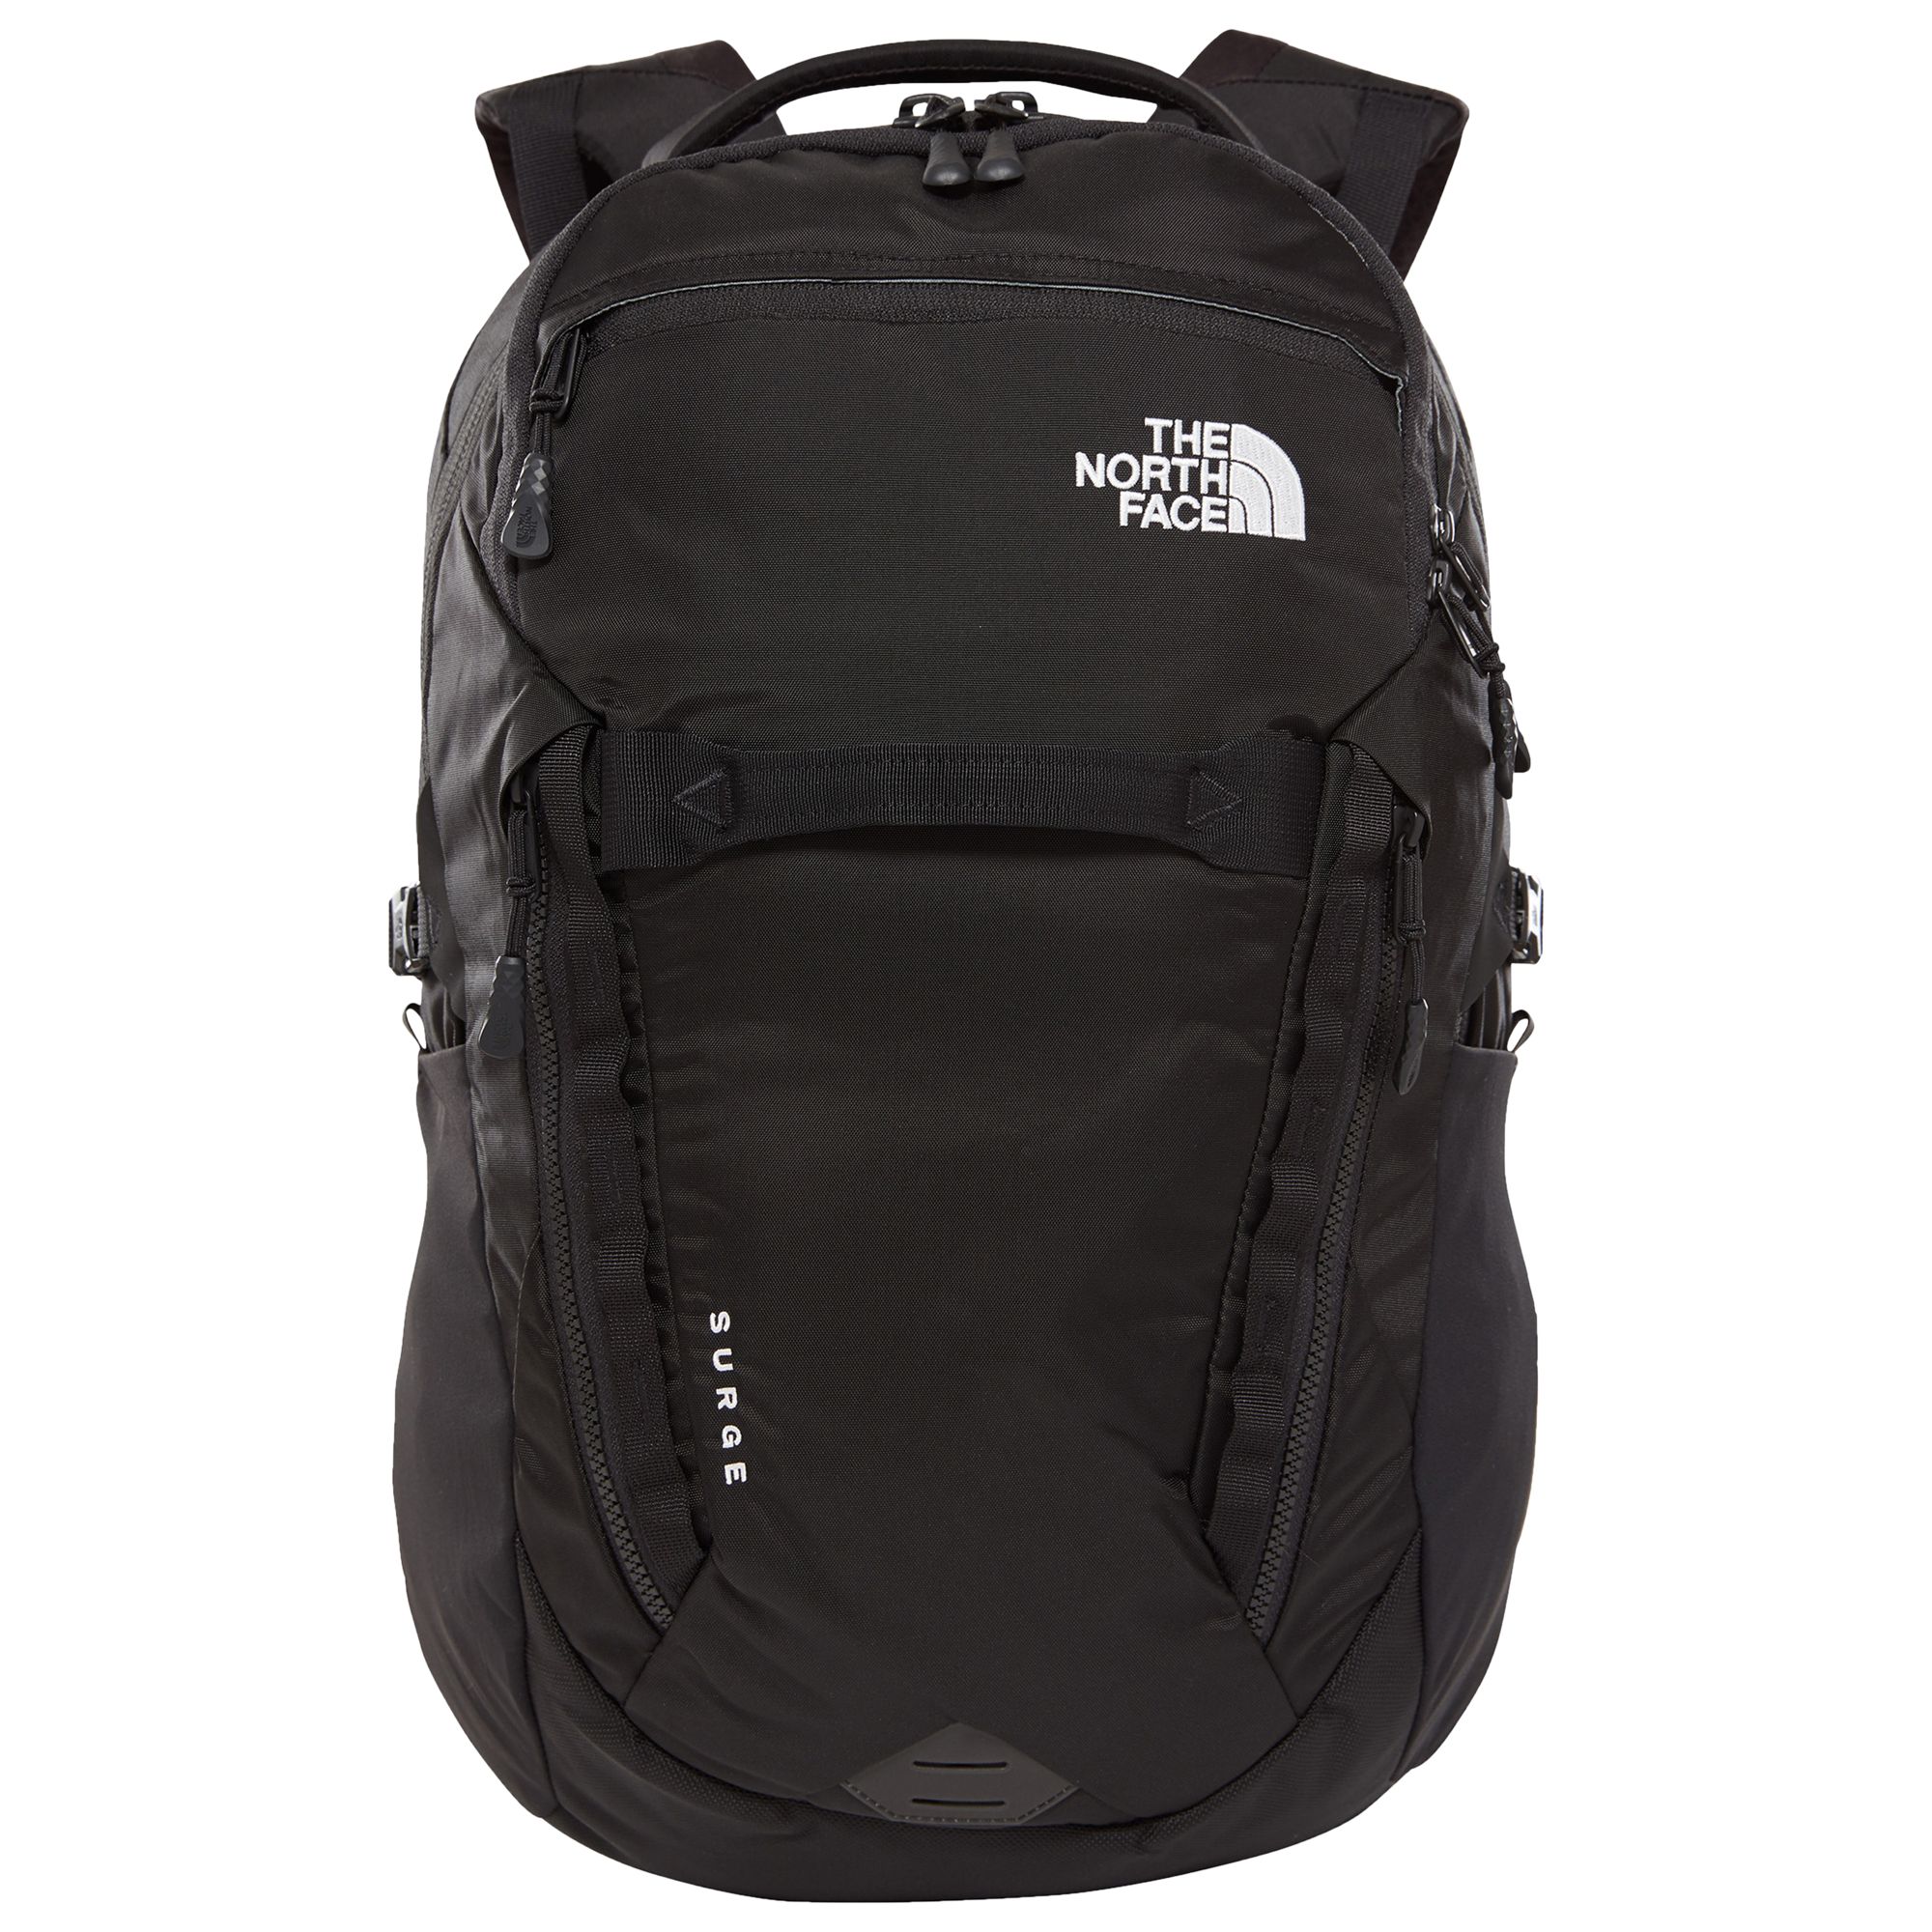 The North Face Surge Backpack, Black at John Lewis & Partners